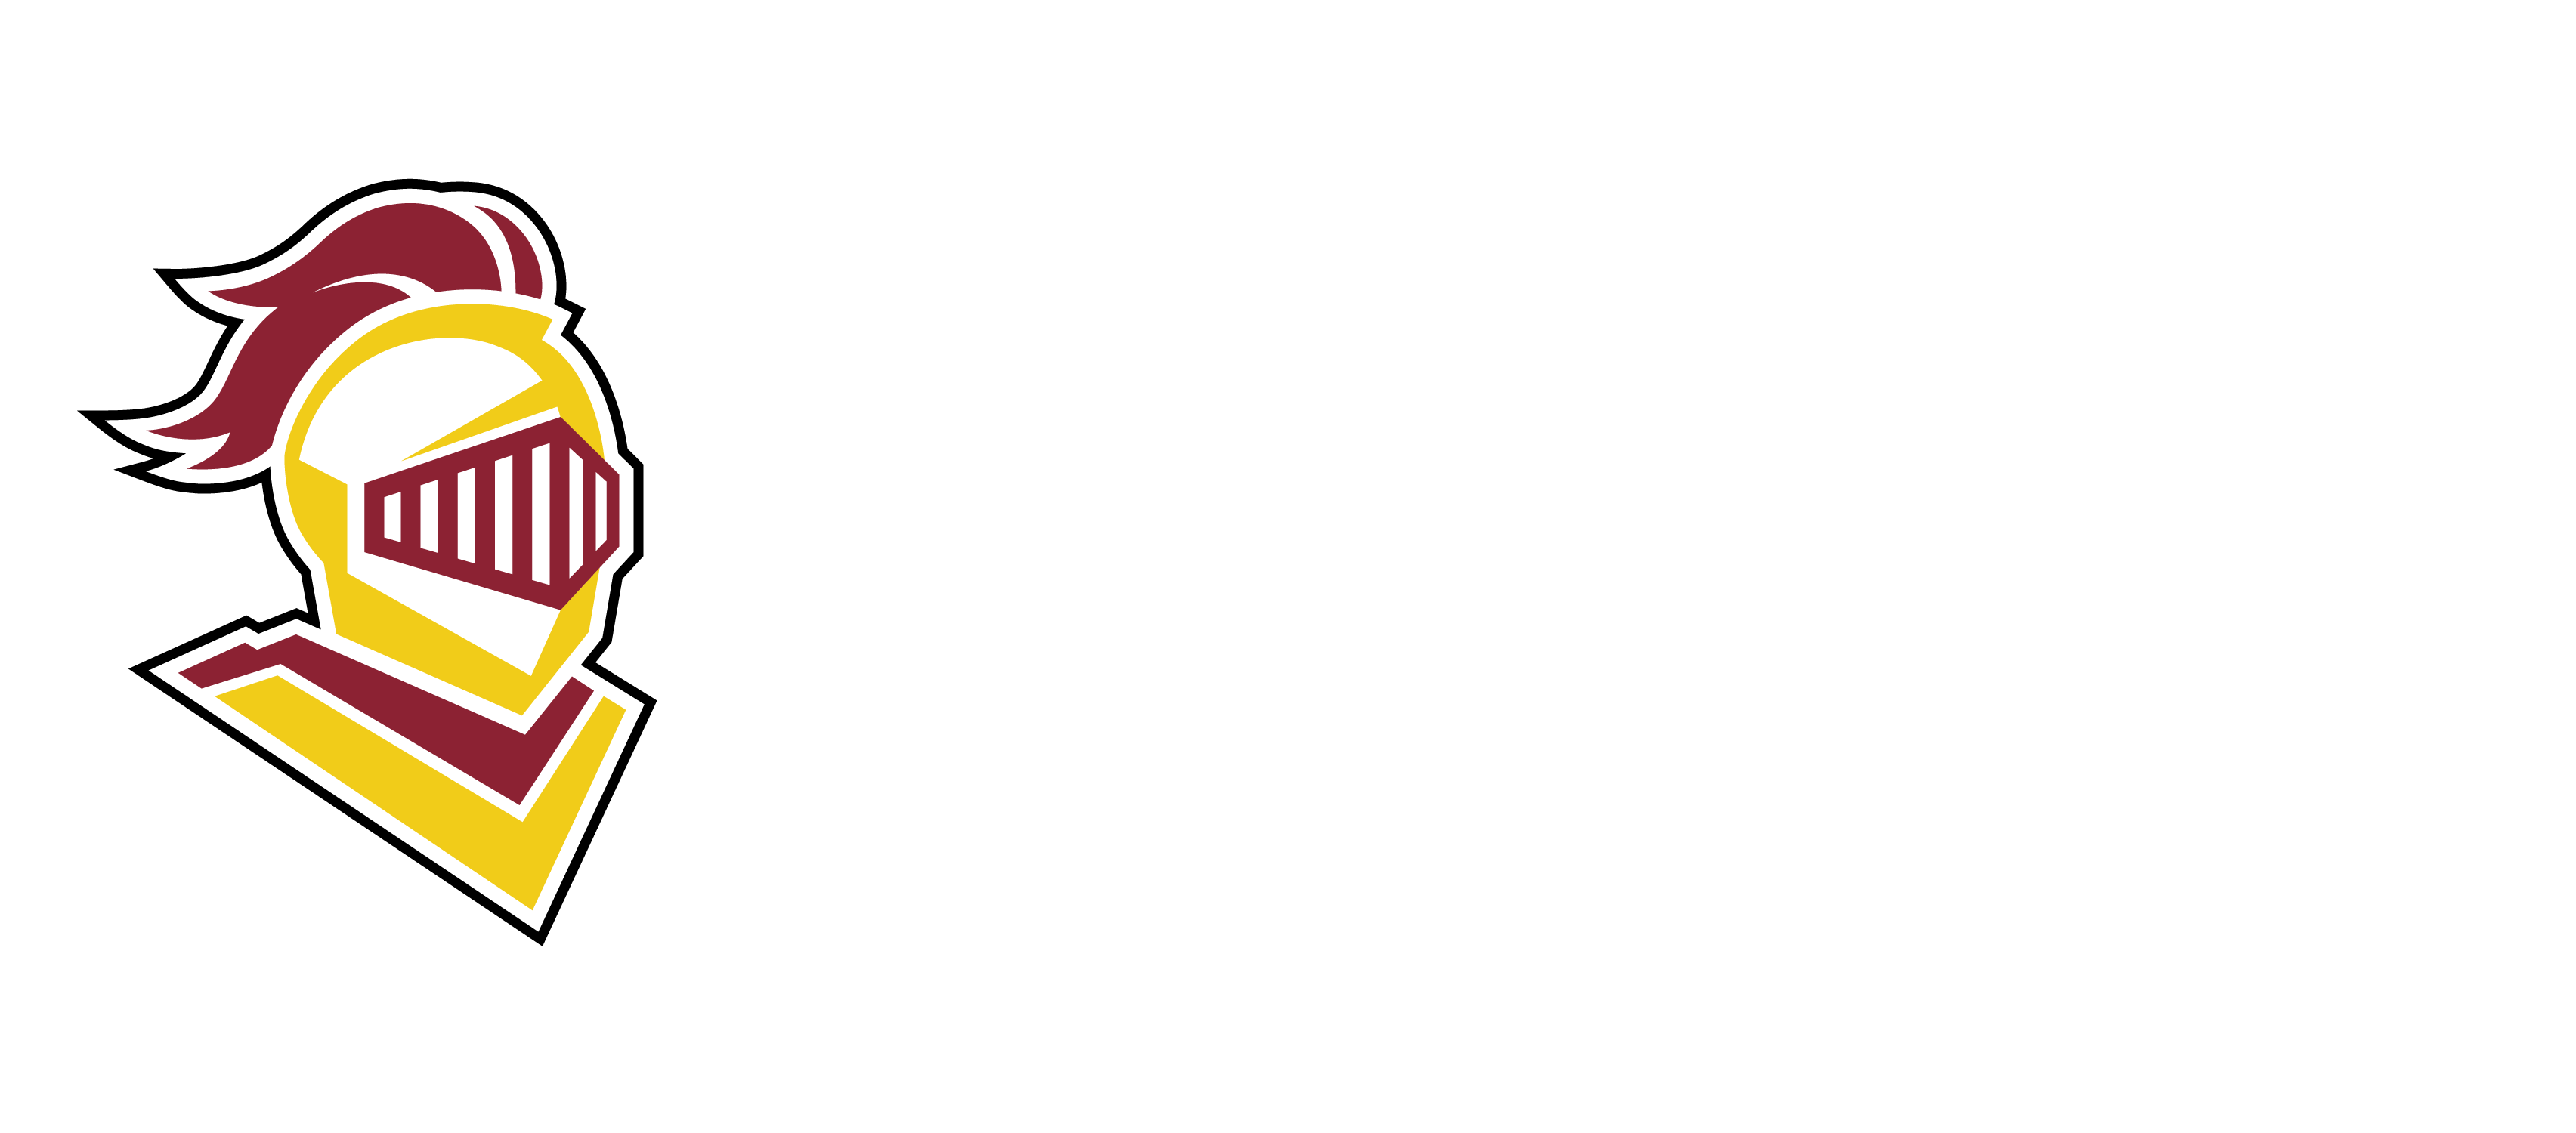 i-committed-calvin-horizontal-1.png